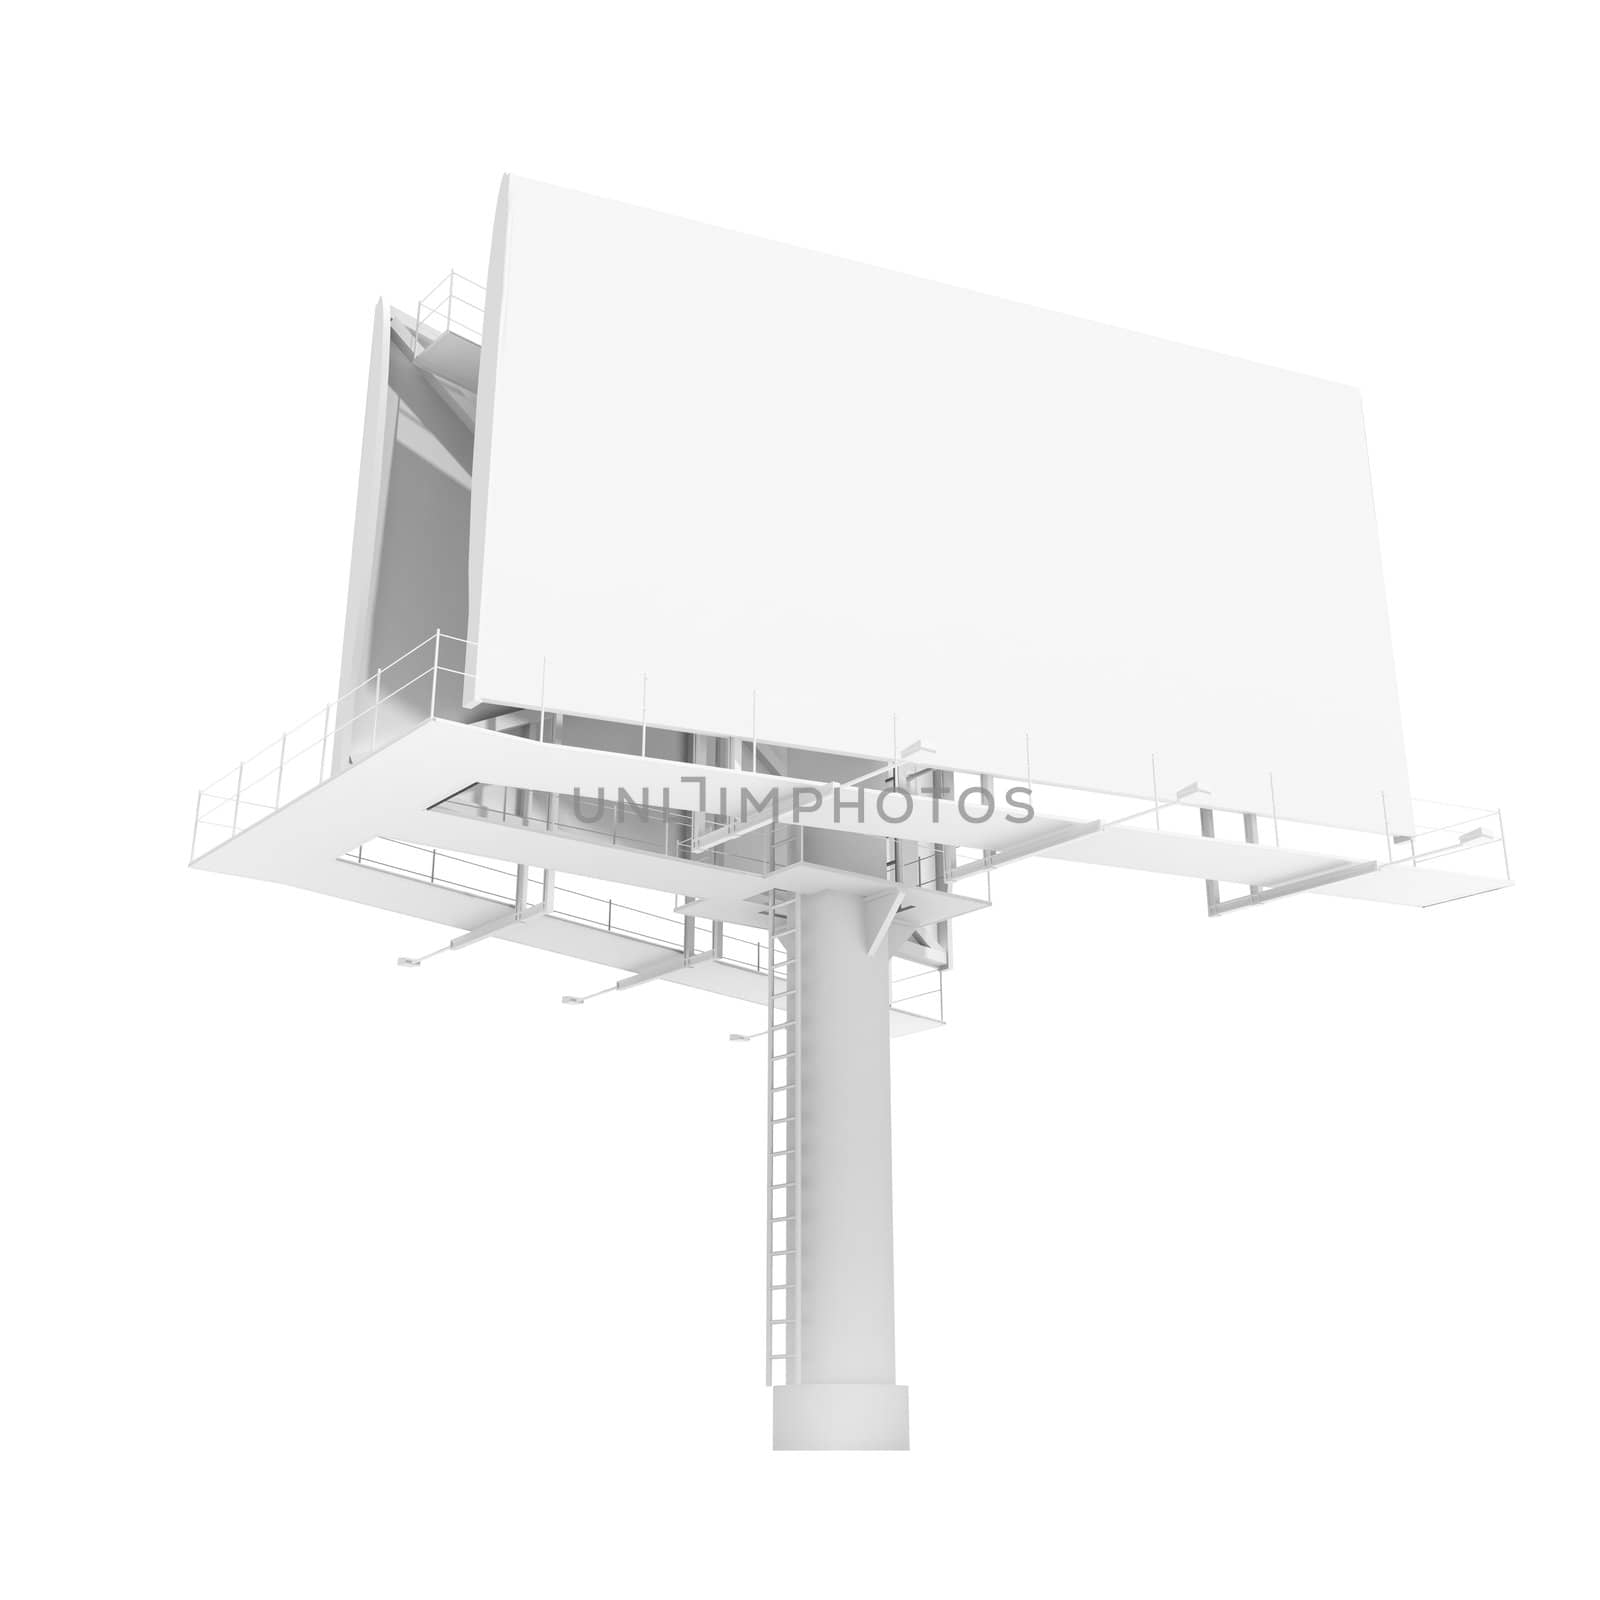 Street billboard. Isolated render on a white background